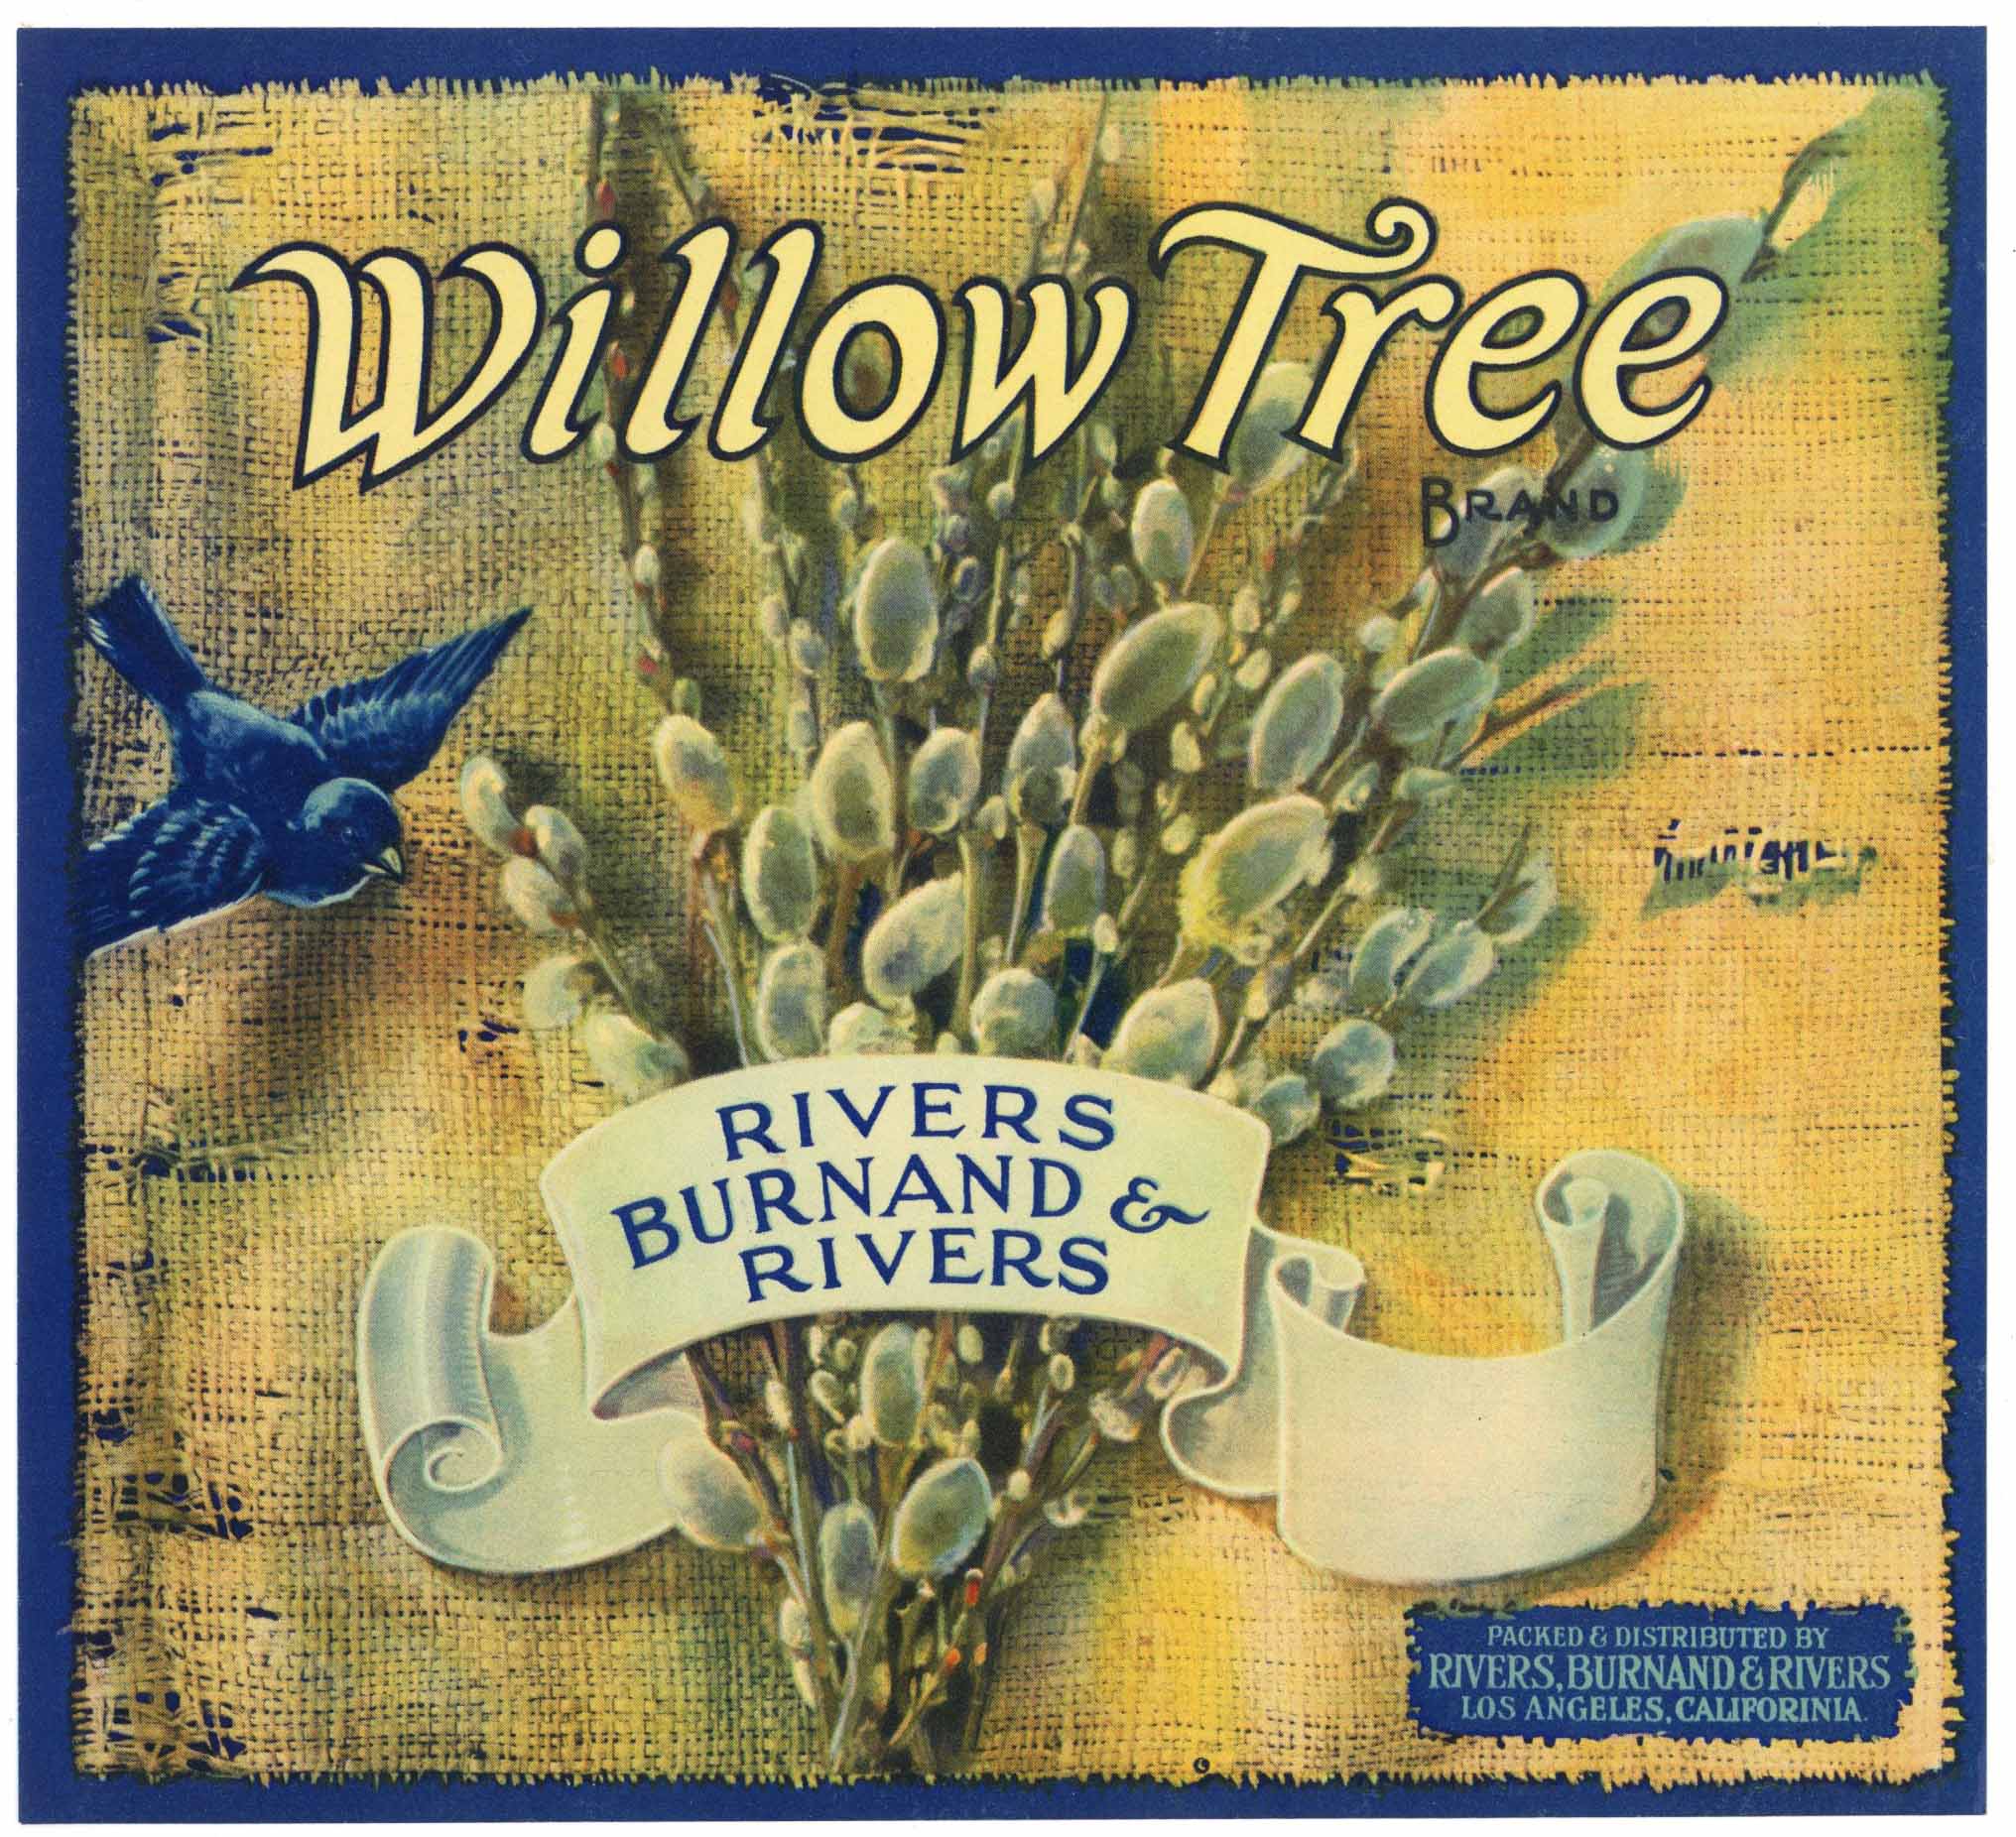 Willow Tree Brand Vintage Apple Crate Label, white